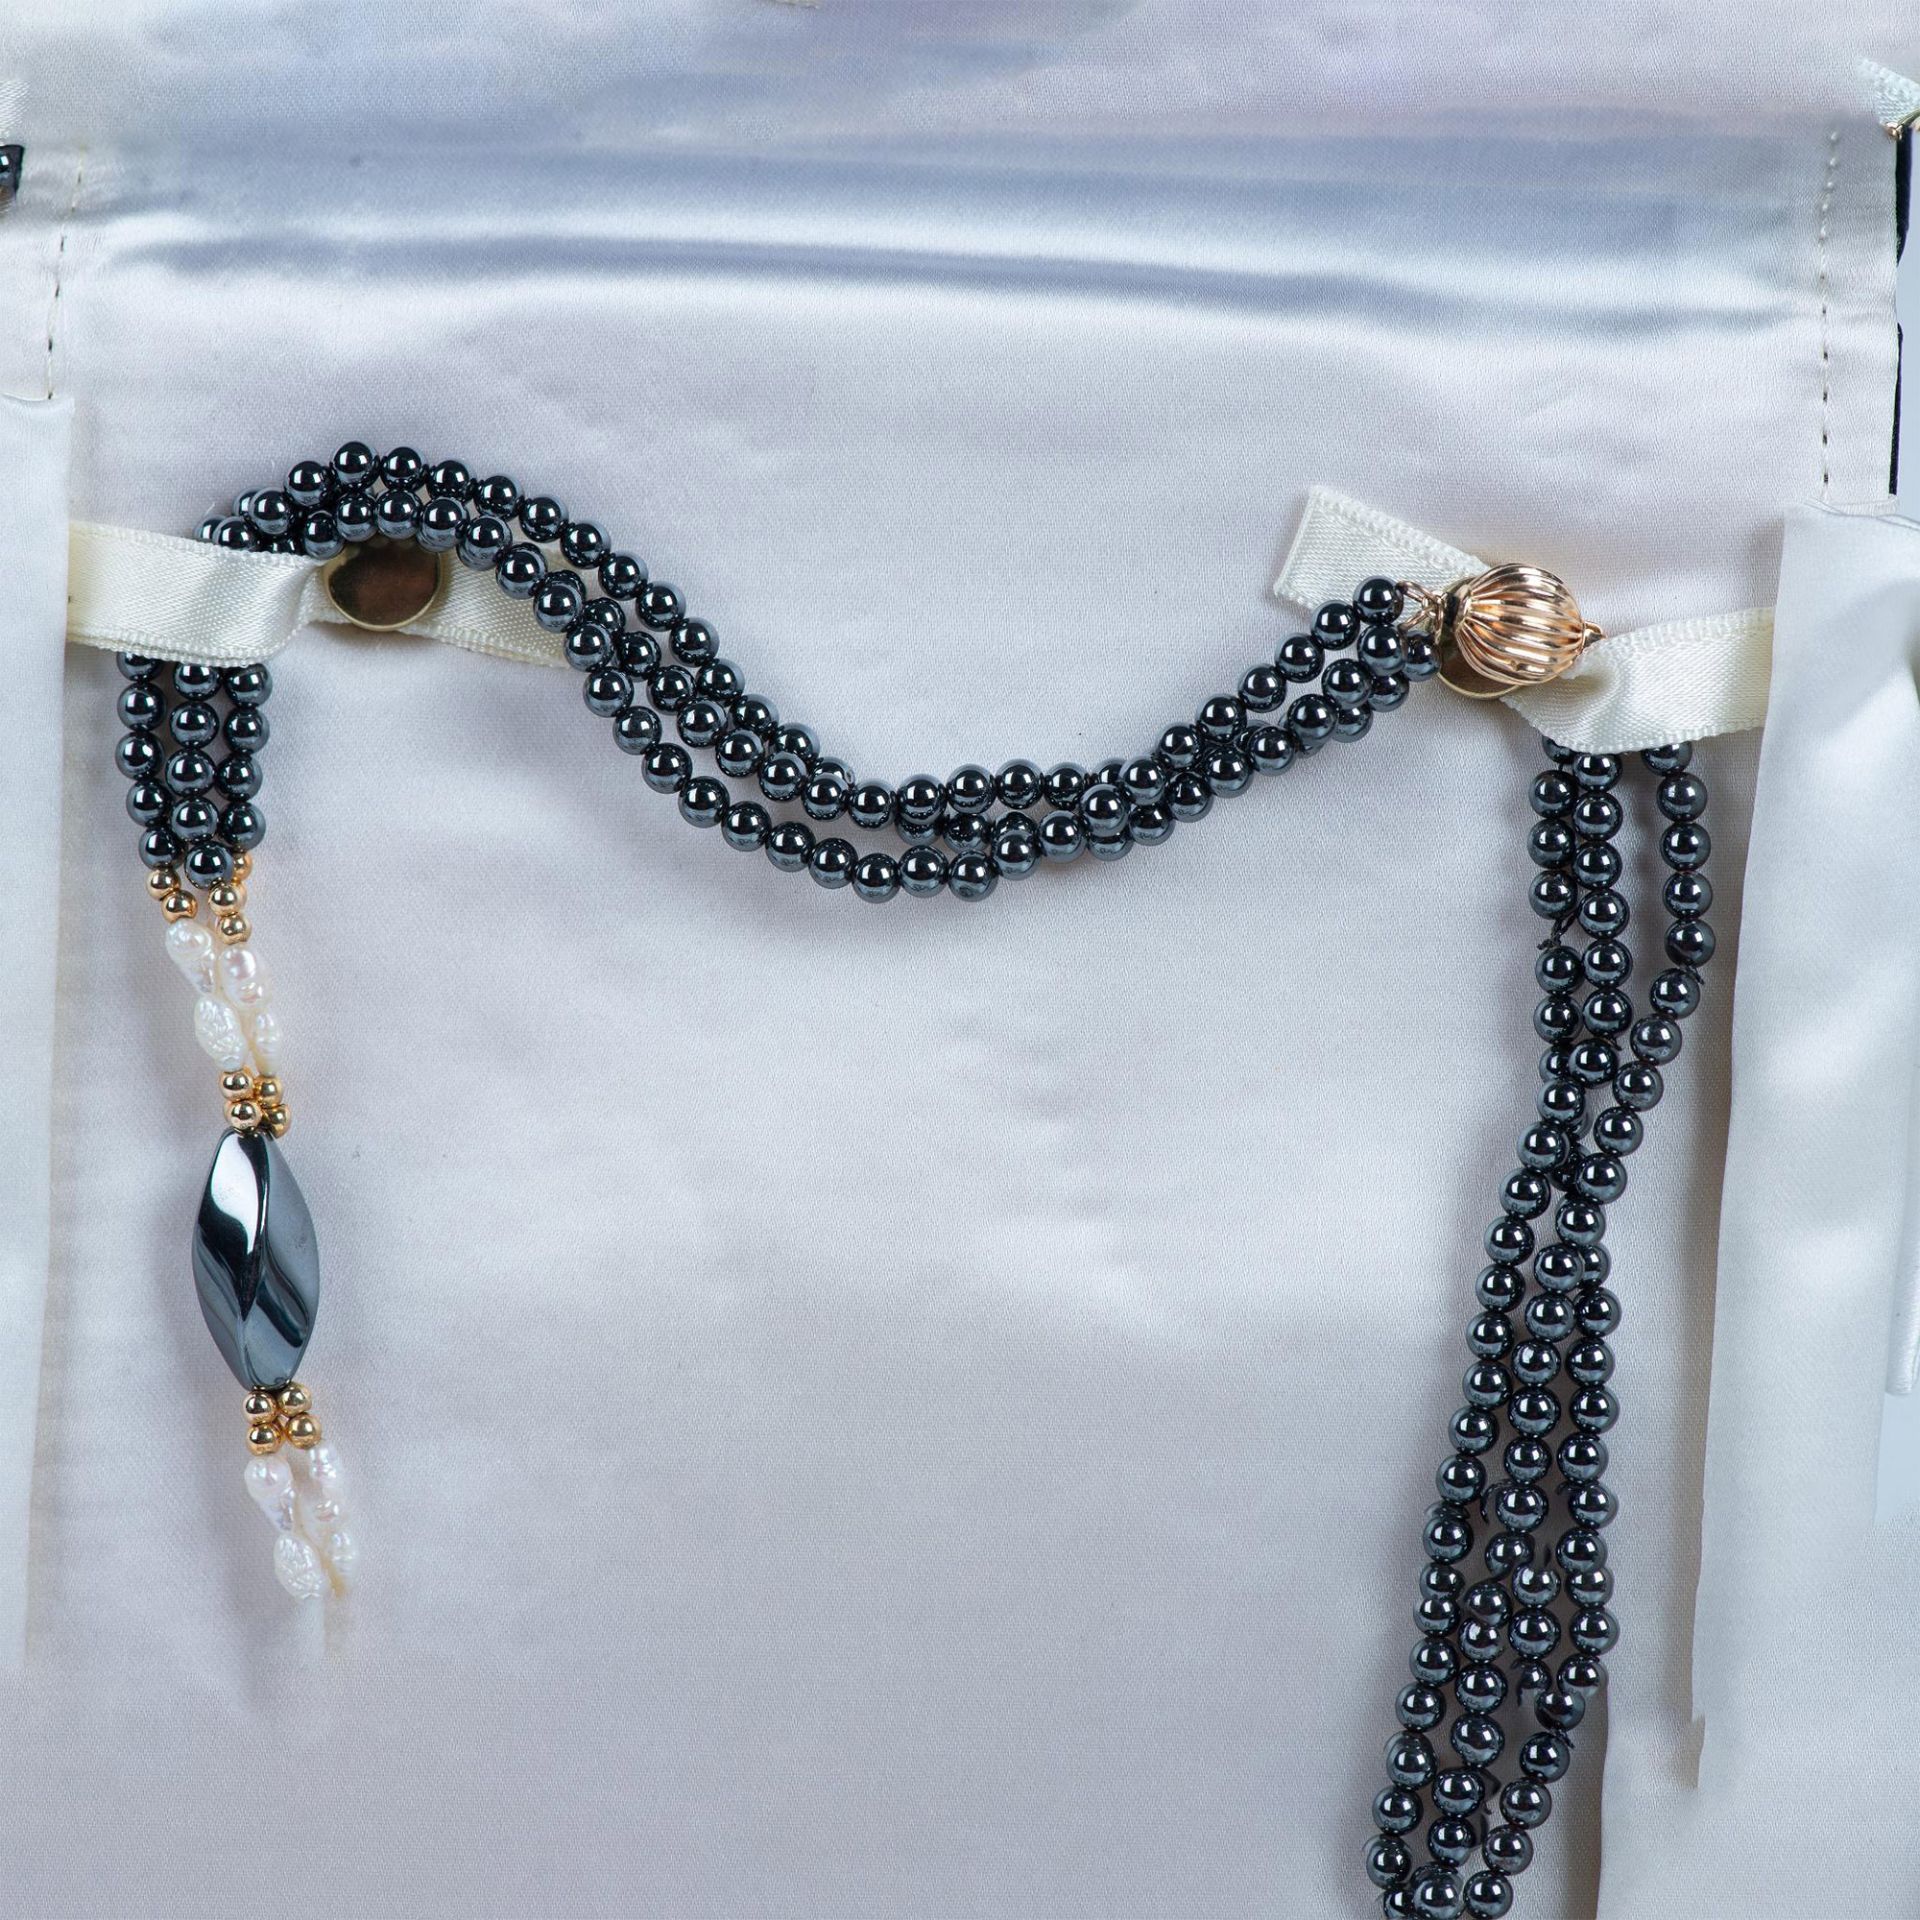 Black Onyx & Fresh Water Pearl Necklace - Image 3 of 7